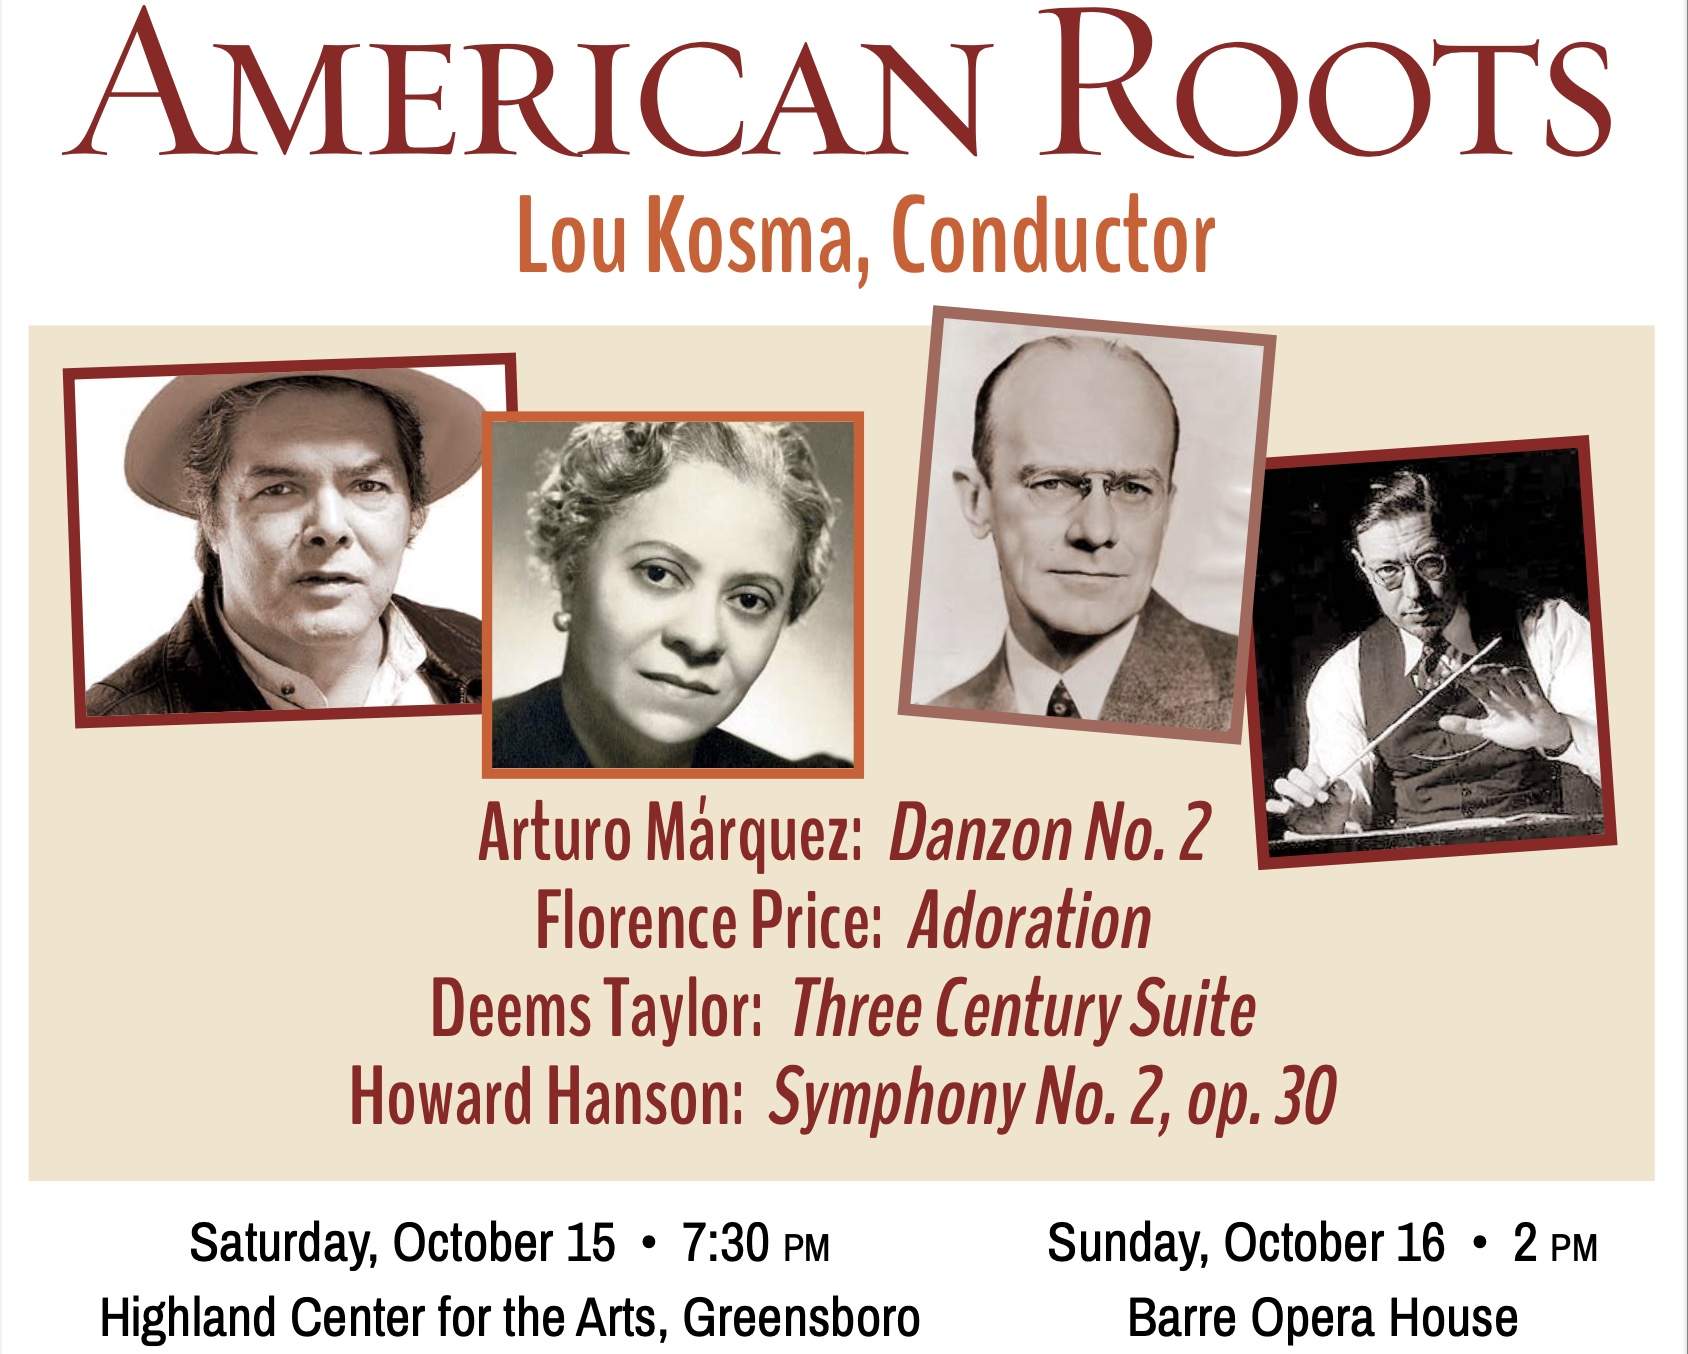 Poster of American Roots Concert October 15 & 16, 2022.